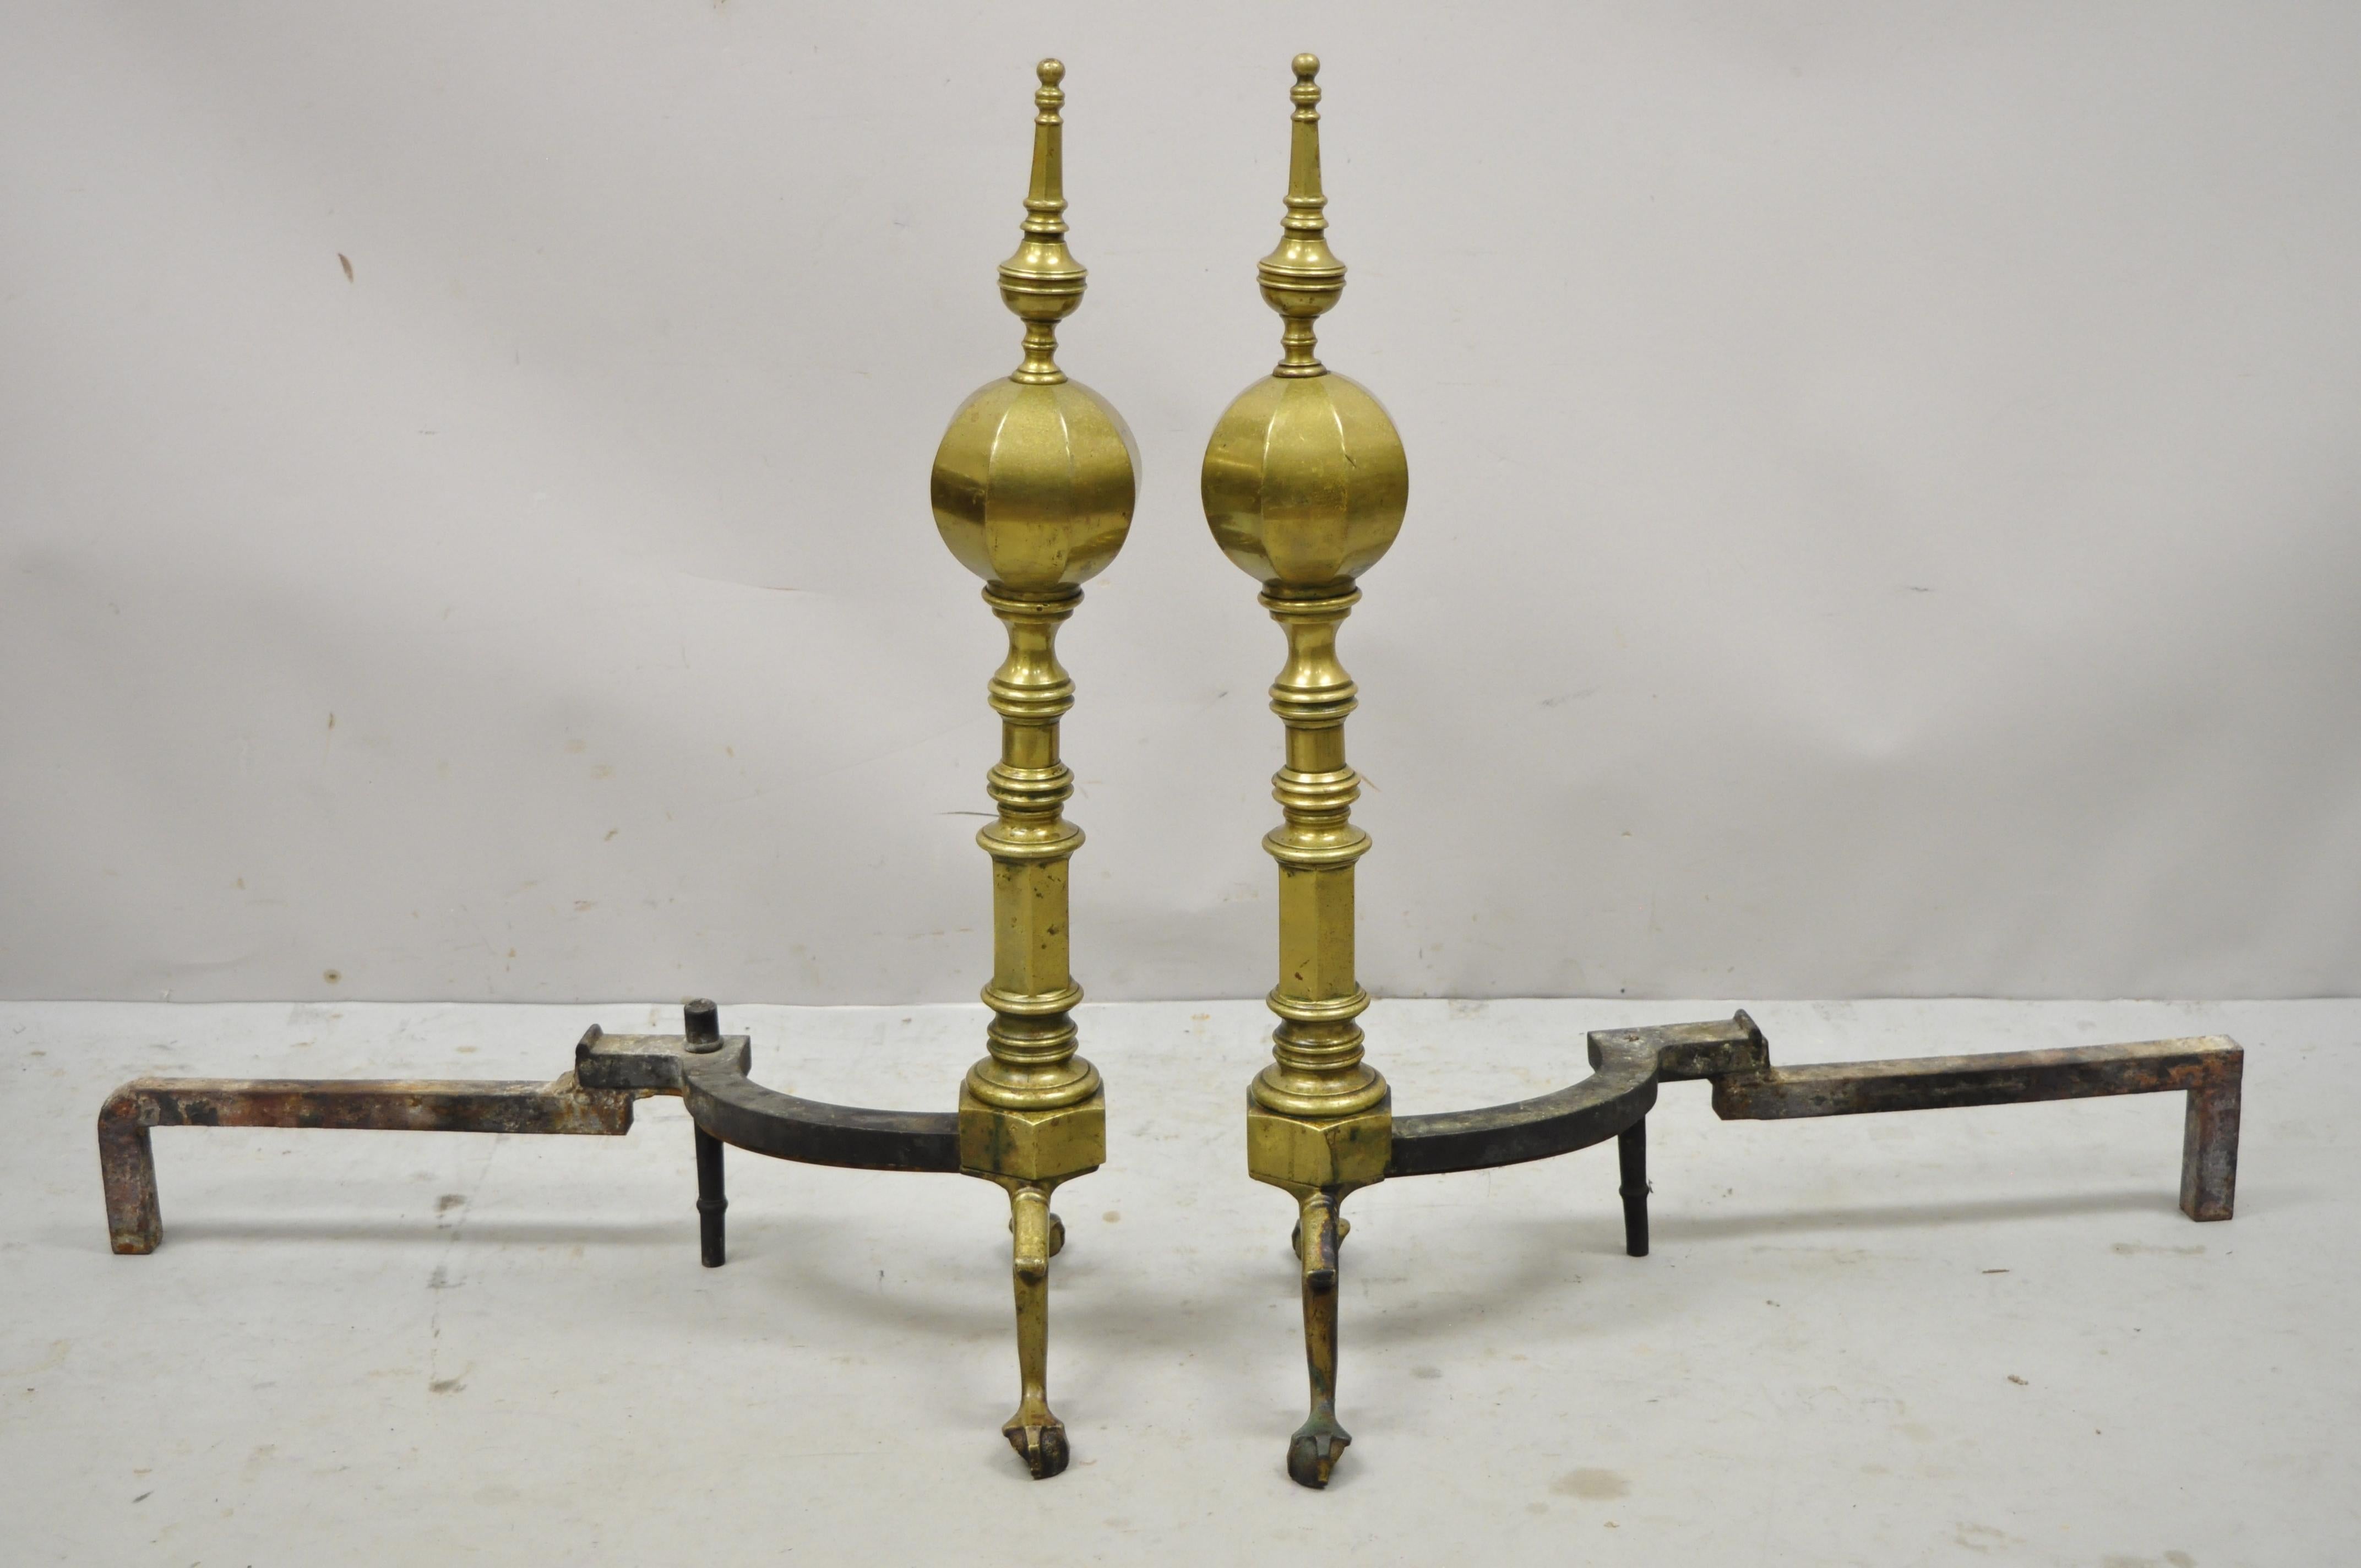 Antique English Federal Faceted Brass Cannonball Branch Feet Cast Iron Andirons - a Pair. Item features large impressive size, ball and claw branch feet, great original patina, faceted cannonball forms, brass and cast iron construction, very nice